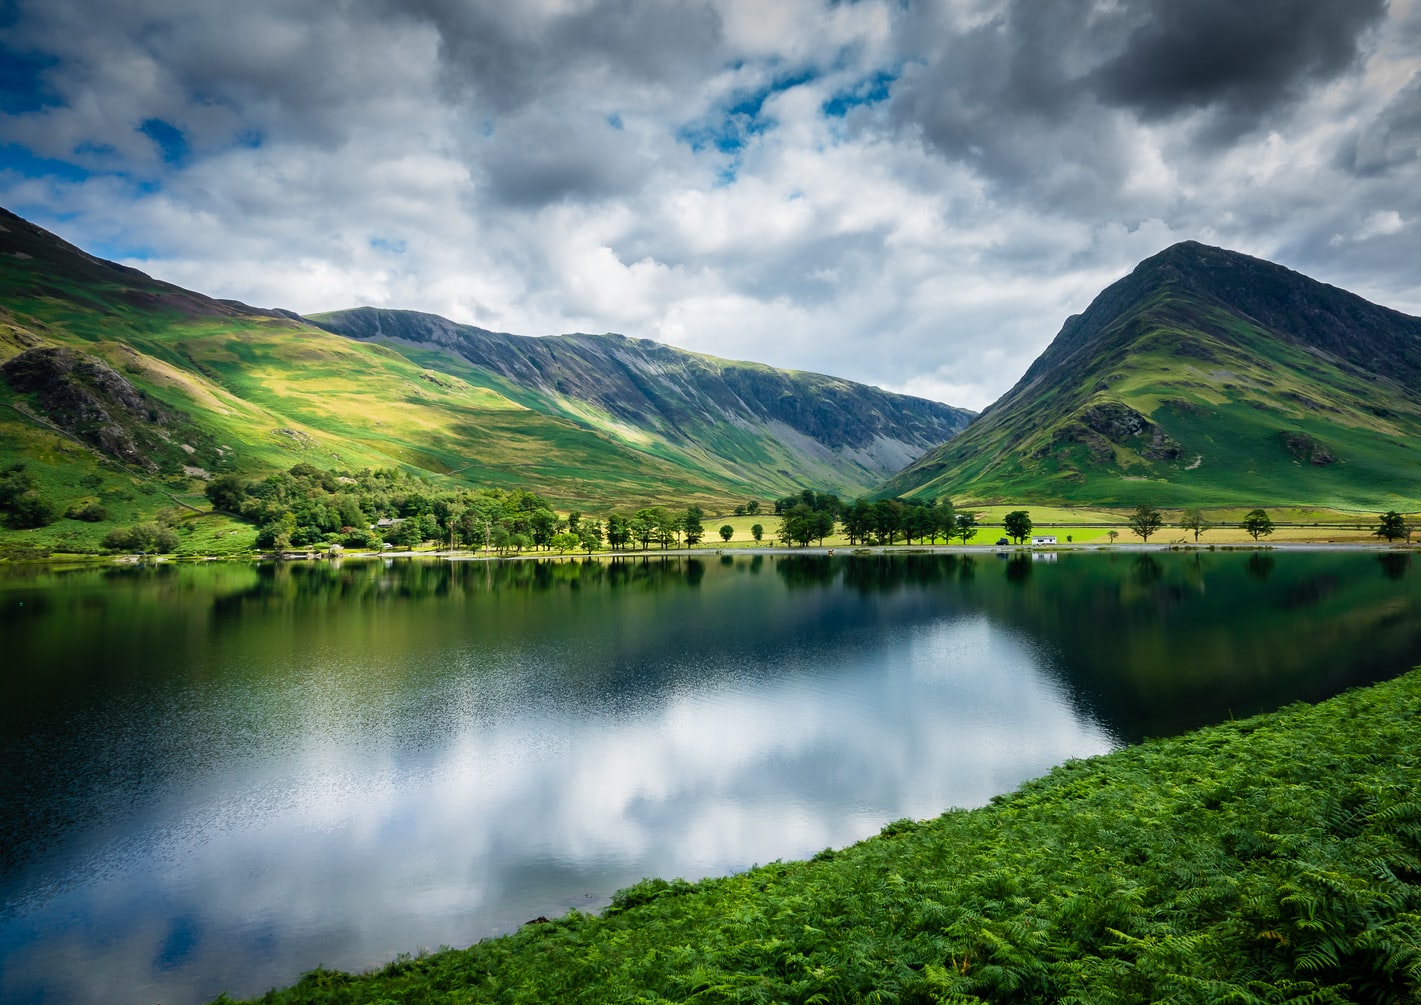 5 Ways to Spend a Weekend in the Lake District